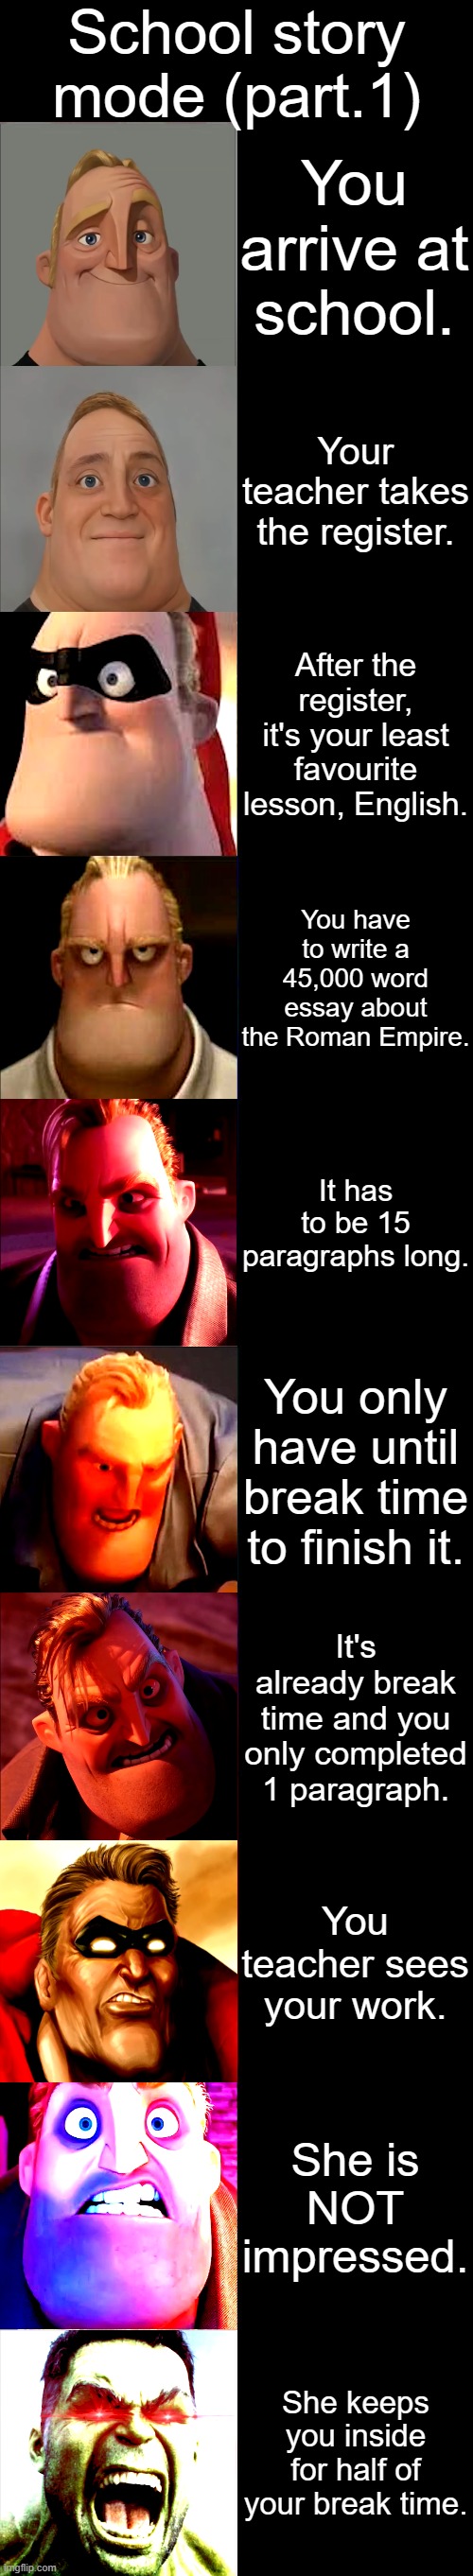 Mr Incredible becoming uncanny: school story mode part.1 | School story mode (part.1); You arrive at school. Your teacher takes the register. After the register, it's your least favourite lesson, English. You have to write a 45,000 word essay about the Roman Empire. It has to be 15 paragraphs long. You only have until break time to finish it. It's already break time and you only completed 1 paragraph. You teacher sees your work. She is NOT impressed. She keeps you inside for half of your break time. | image tagged in mr incredible becoming angry | made w/ Imgflip meme maker